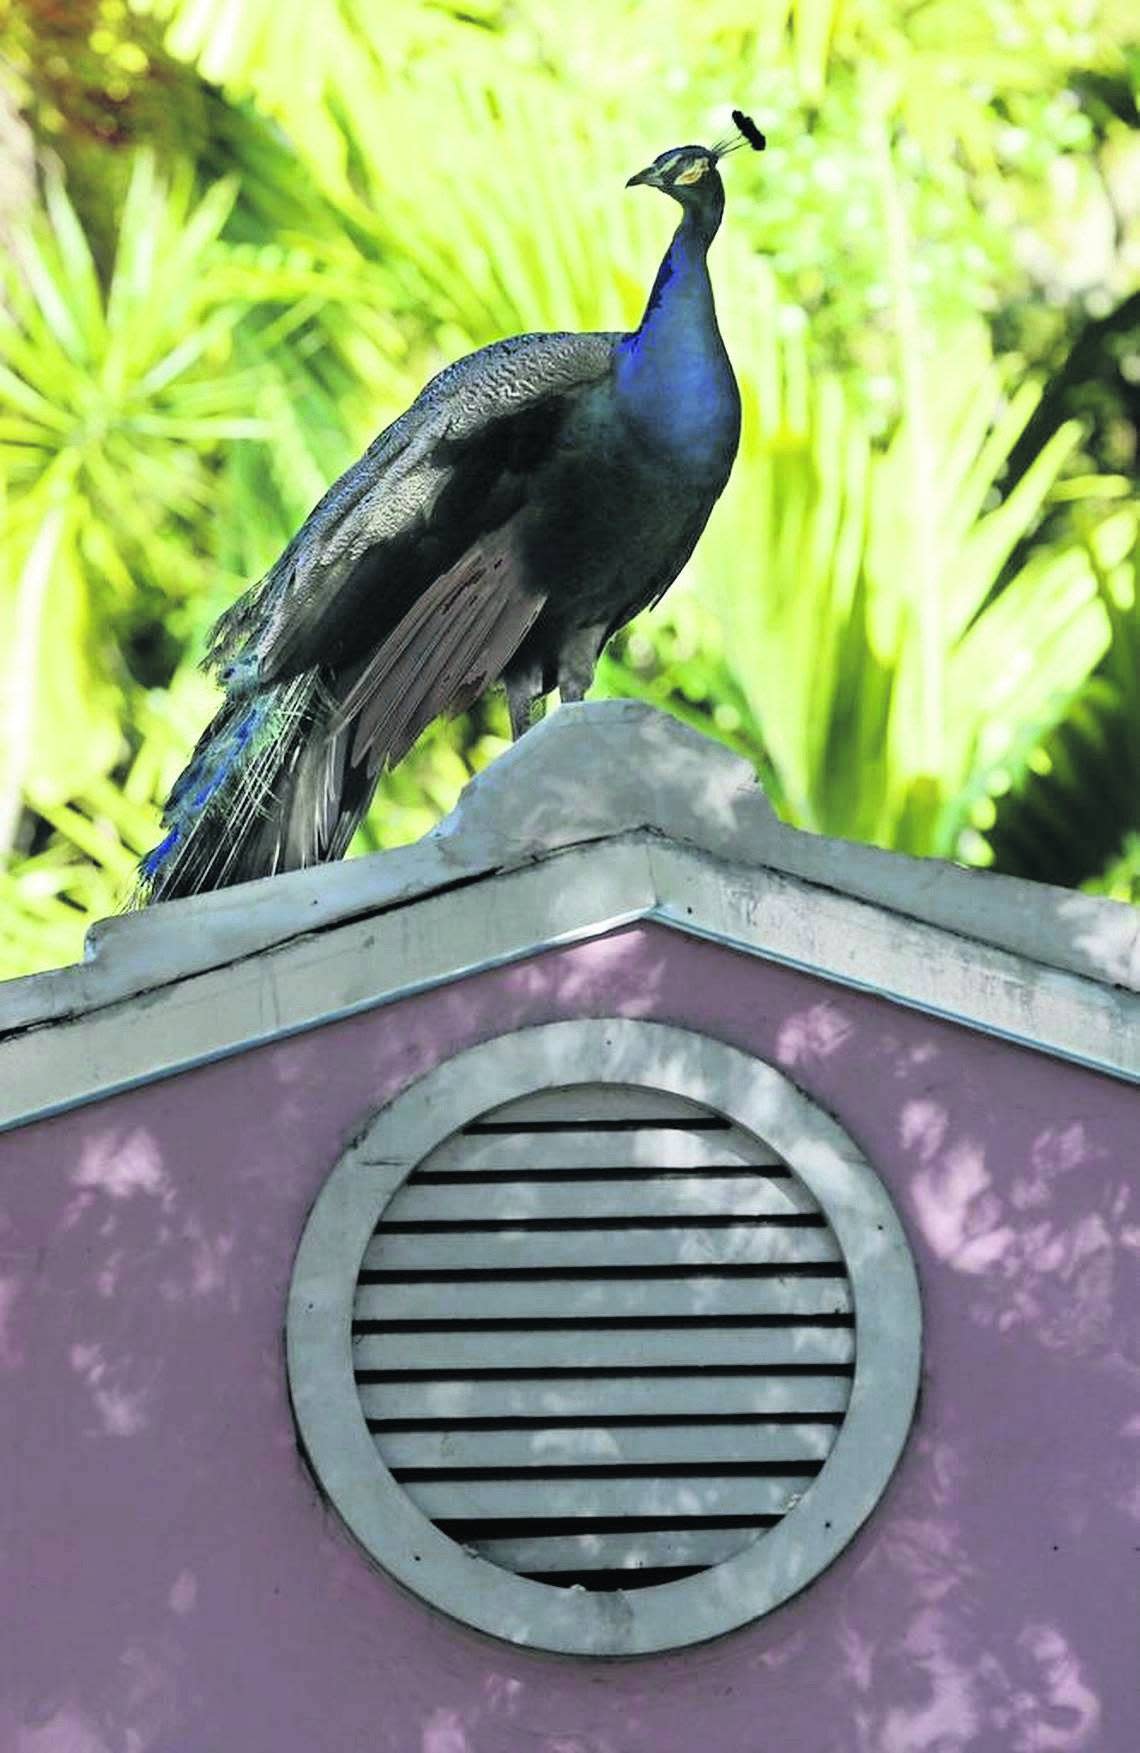 Pinecrest has a plan to deal with the proliferation of peafowl. The birds are pretty but a nuisance, residents say. This is a file photo of peacocks in Coconut Grove from 2020. Al Diaz/adiaz@miamiherald.com